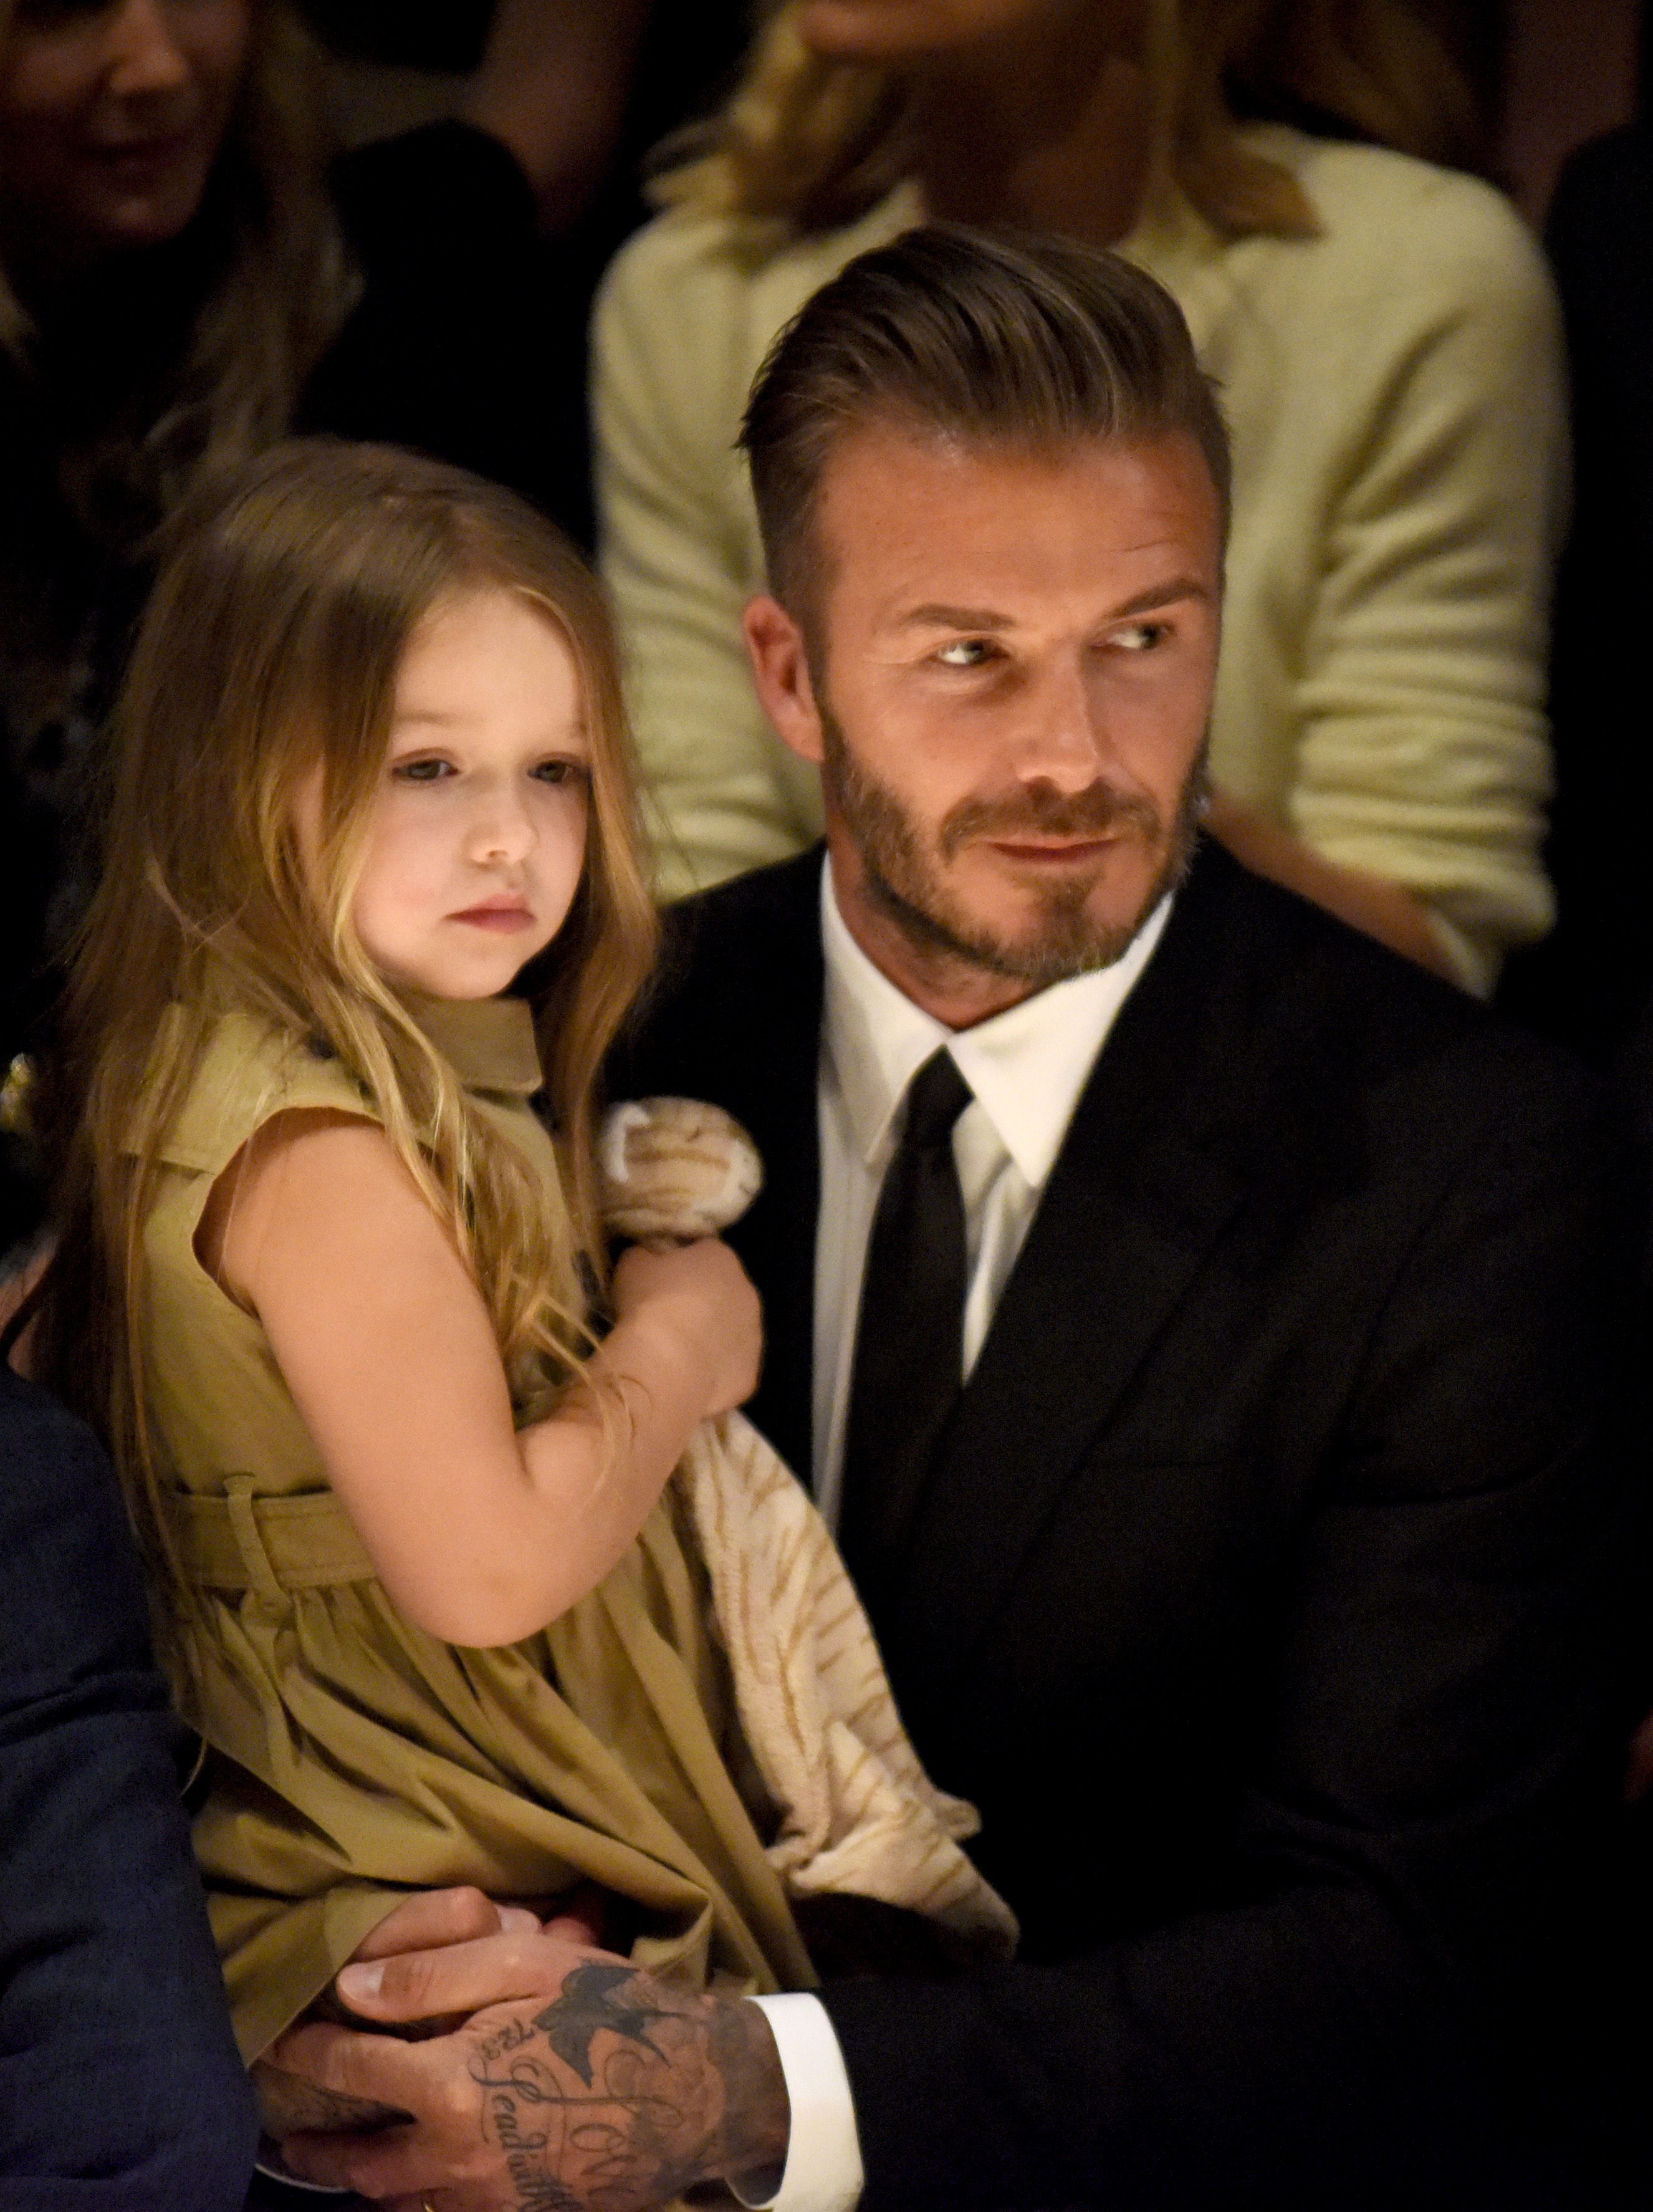 Harper Beckham and David Beckham at the Burberry "London in Los Angeles" event at Griffith Observatory on April 16, 2015 in Los Angeles, California. | Source: Getty Images